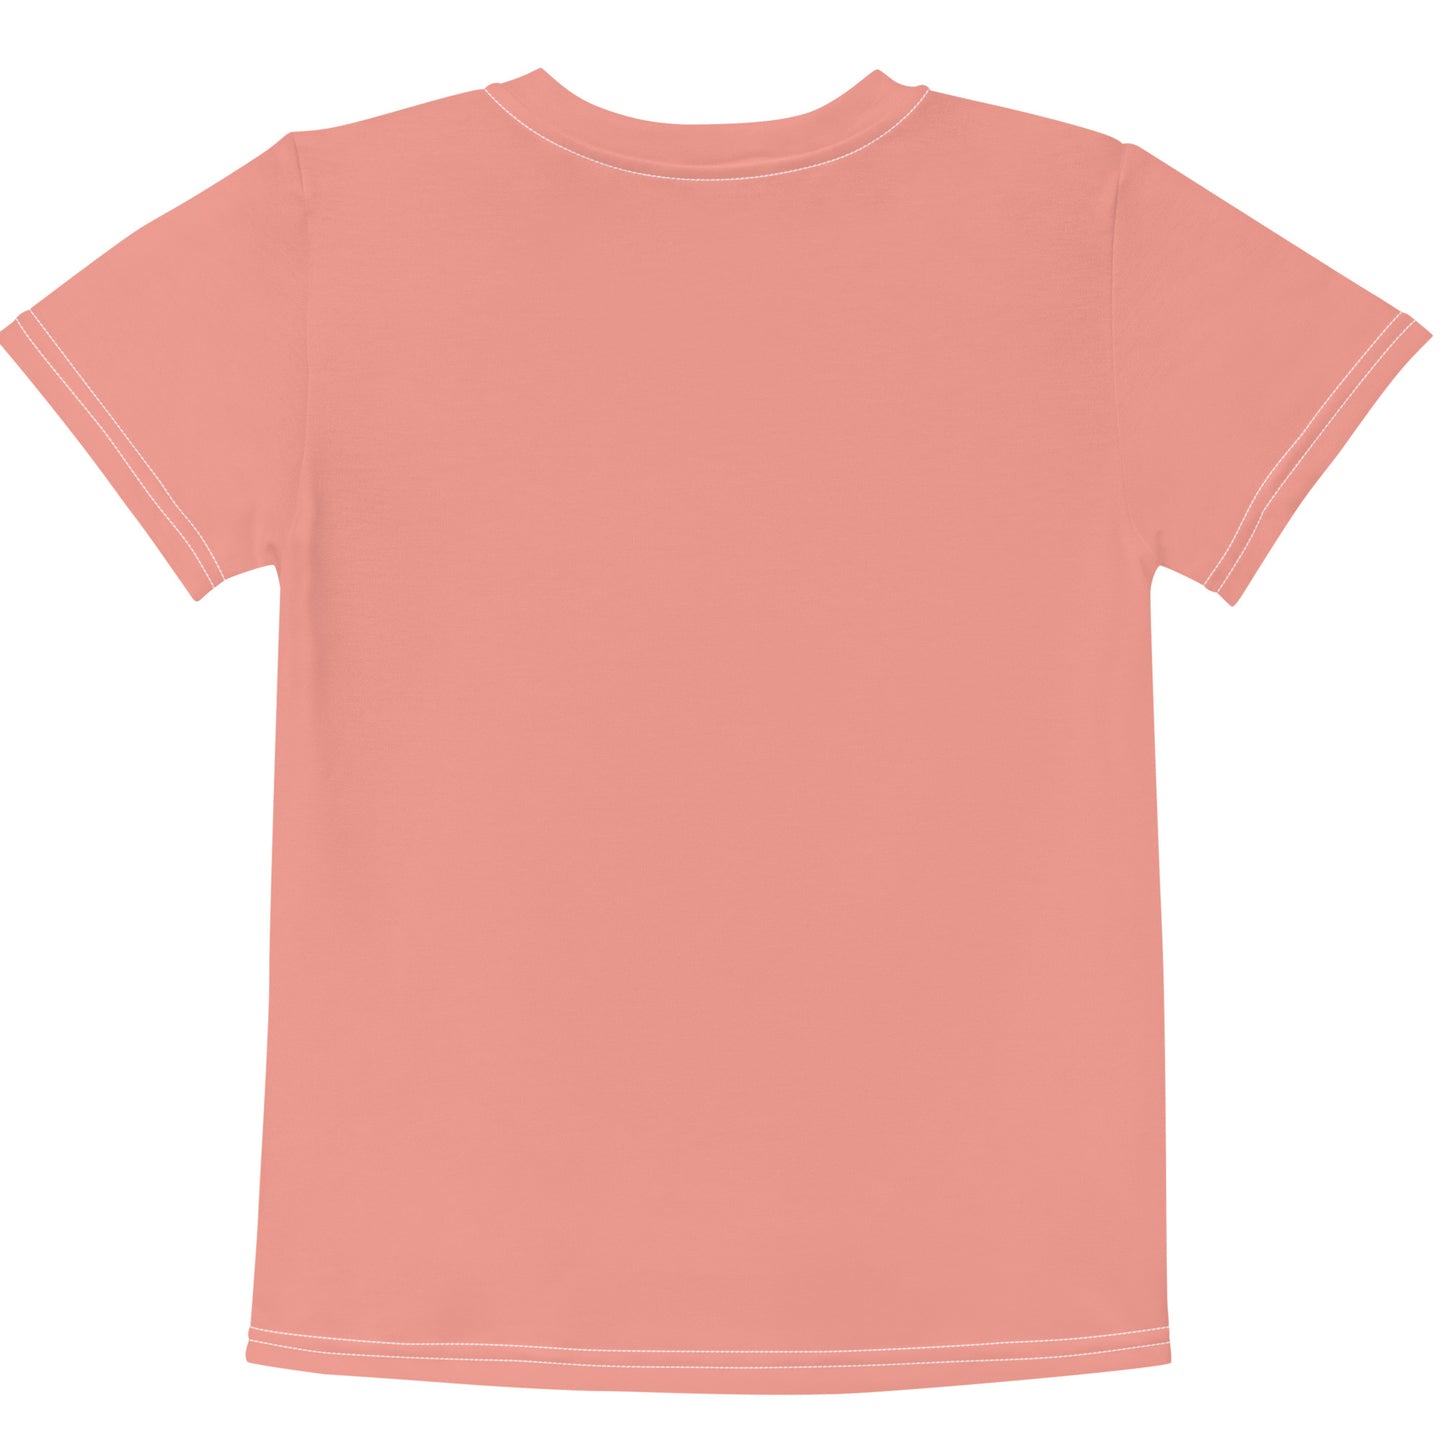 Coral Pink Climate Change Global Warming Statement - Sustainably Made Kids crew neck t-shirt